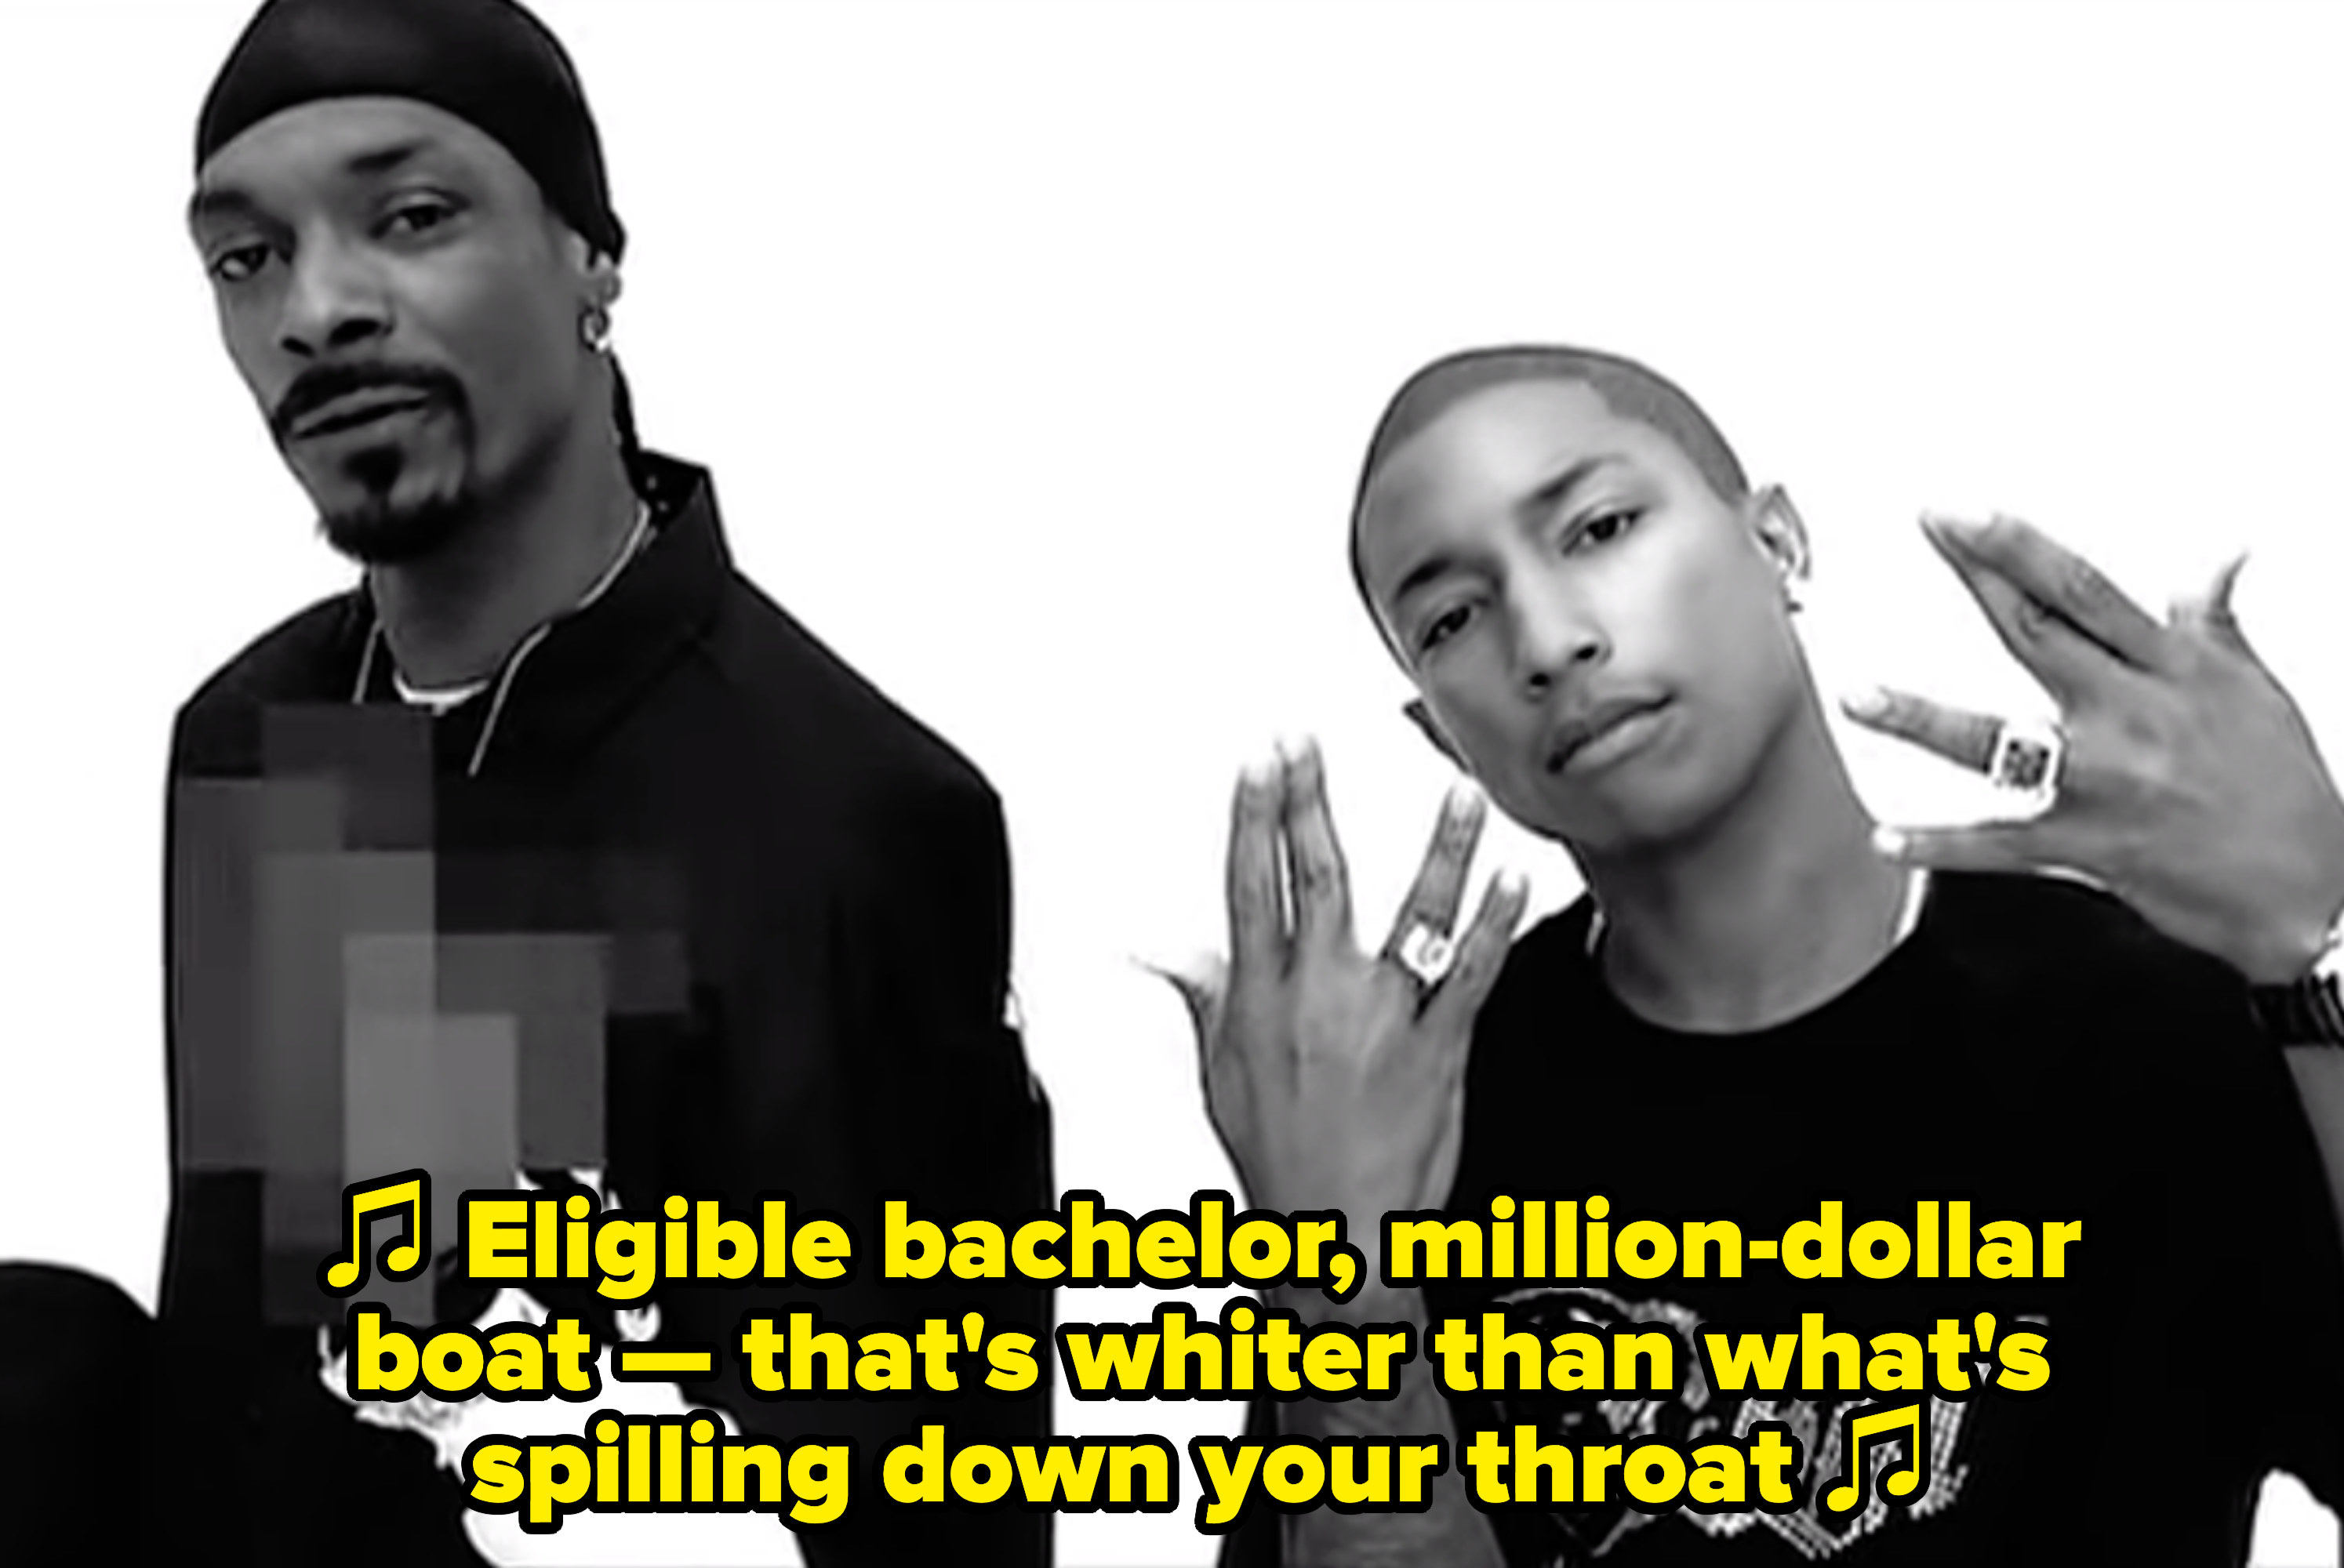 Pharrell singing: &quot;Eligible bachelor, million-dollar boat — that&#x27;s whiter than what&#x27;s spilling down your throat&quot;